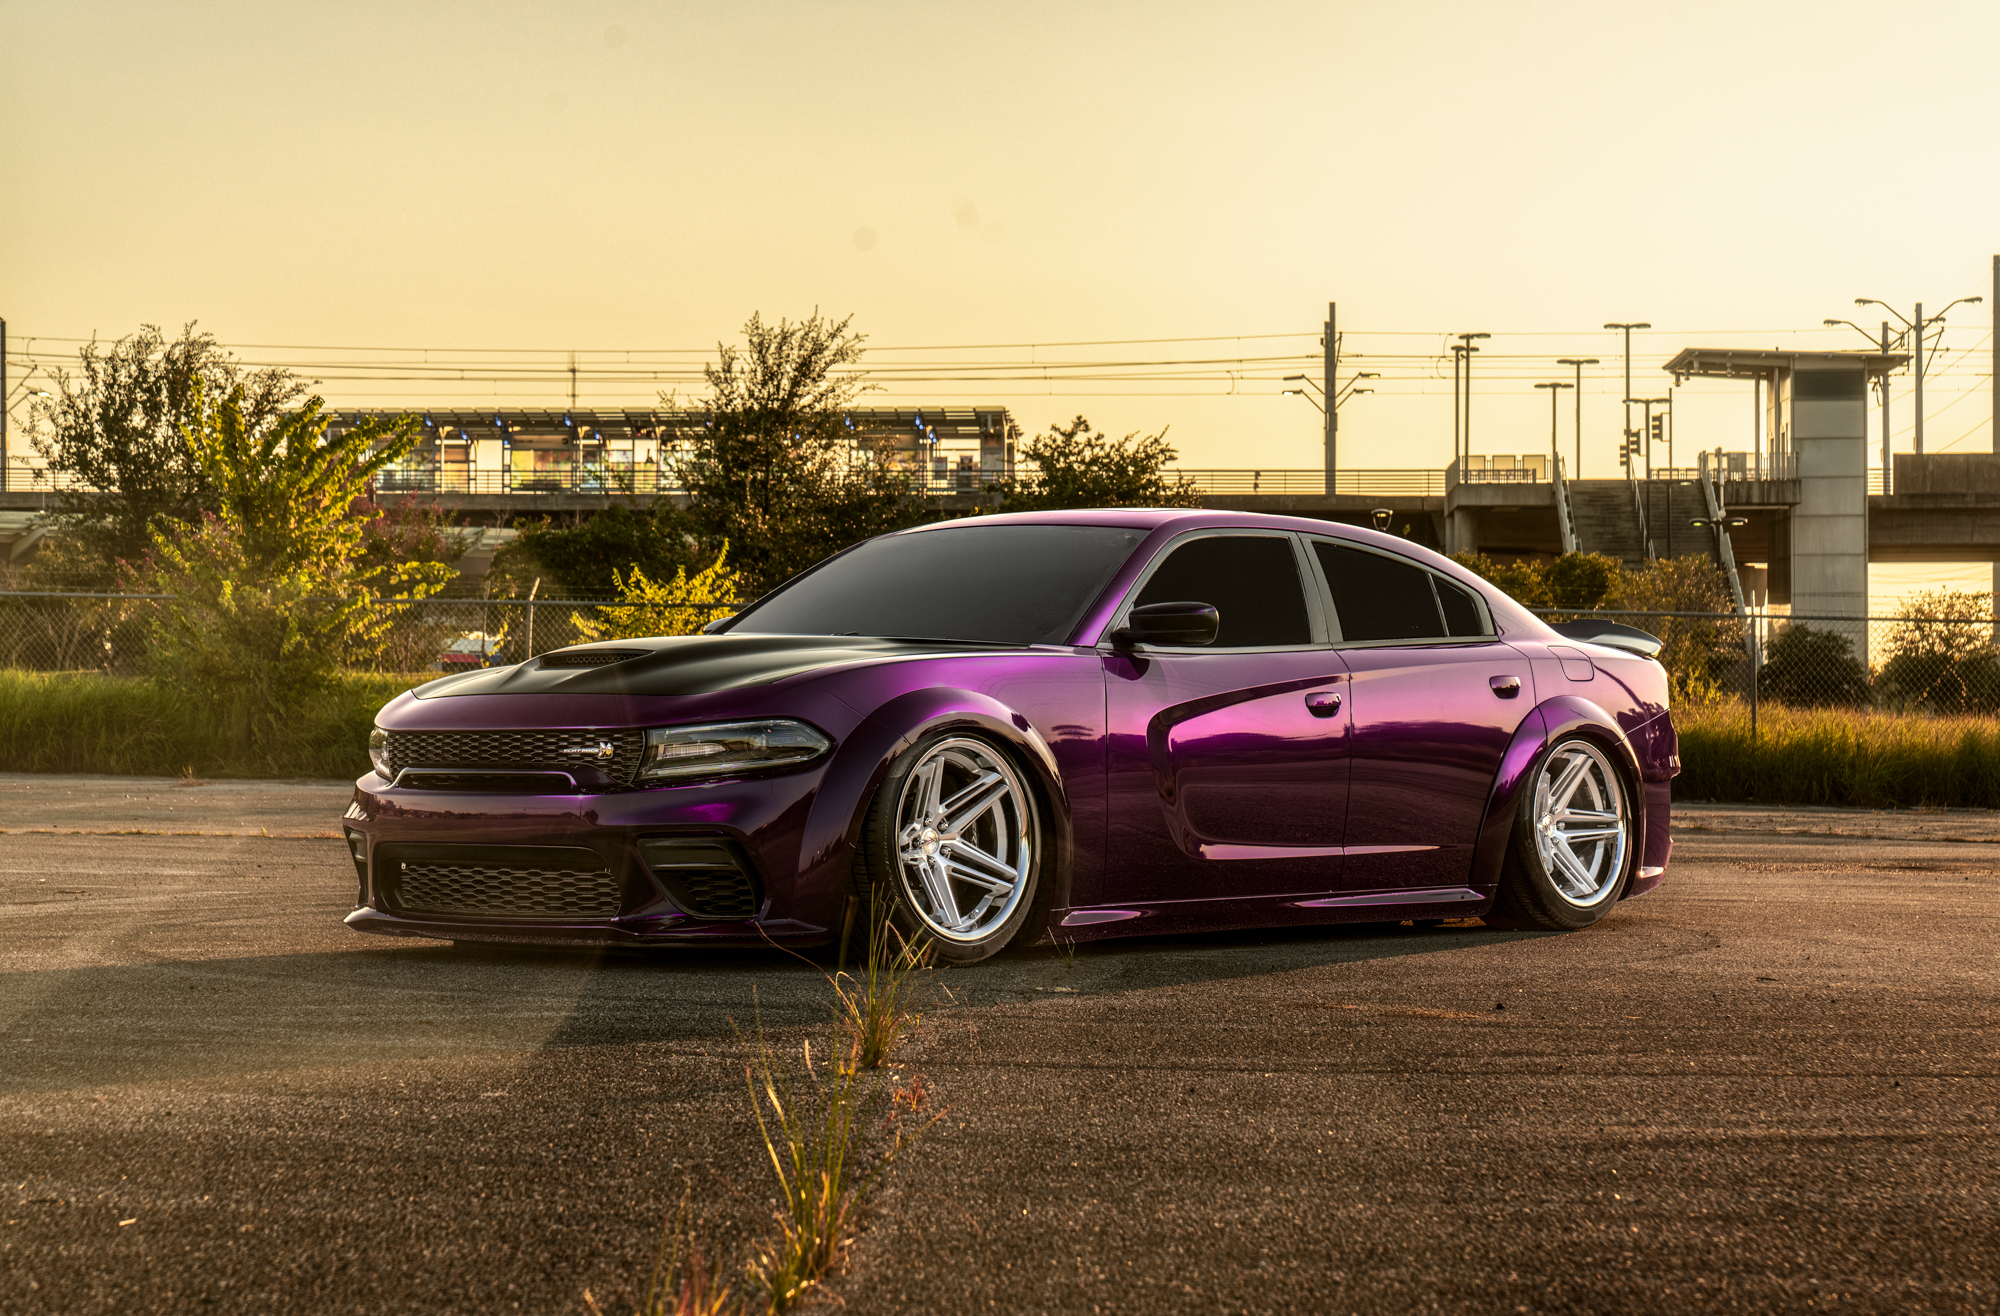 Dodge Charger Widebody (Purple) - DAF CM1 MS (1 of 8)